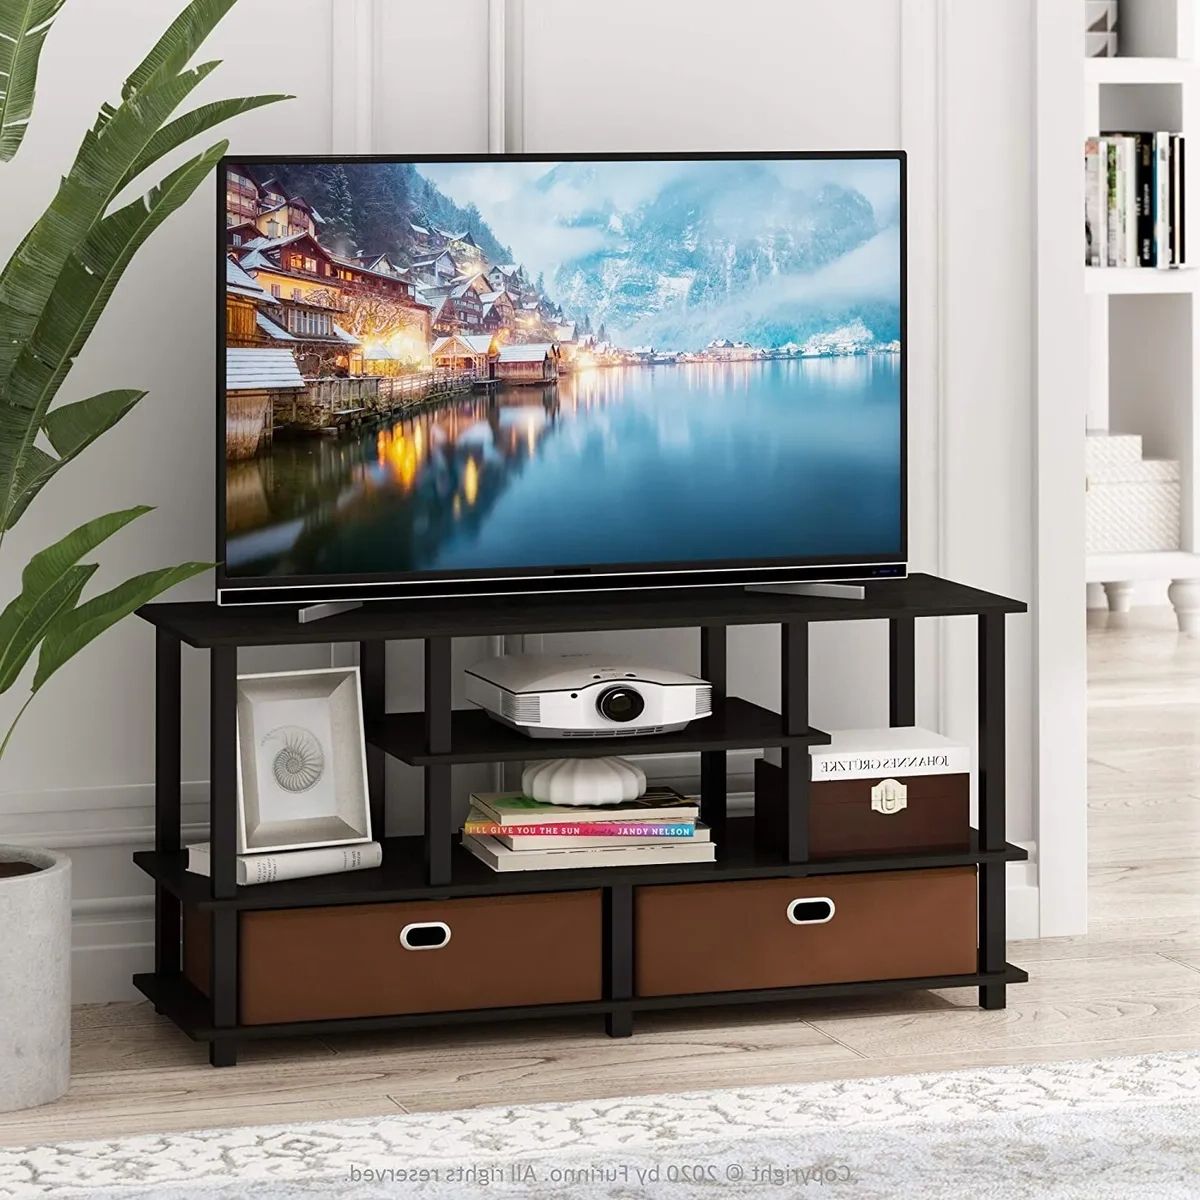 Wide Tv Stand Entertainment Center Narrow With Storage For 50 Inch Tvs  Bedroom | Ebay For Wide Entertainment Centers (Gallery 1 of 20)